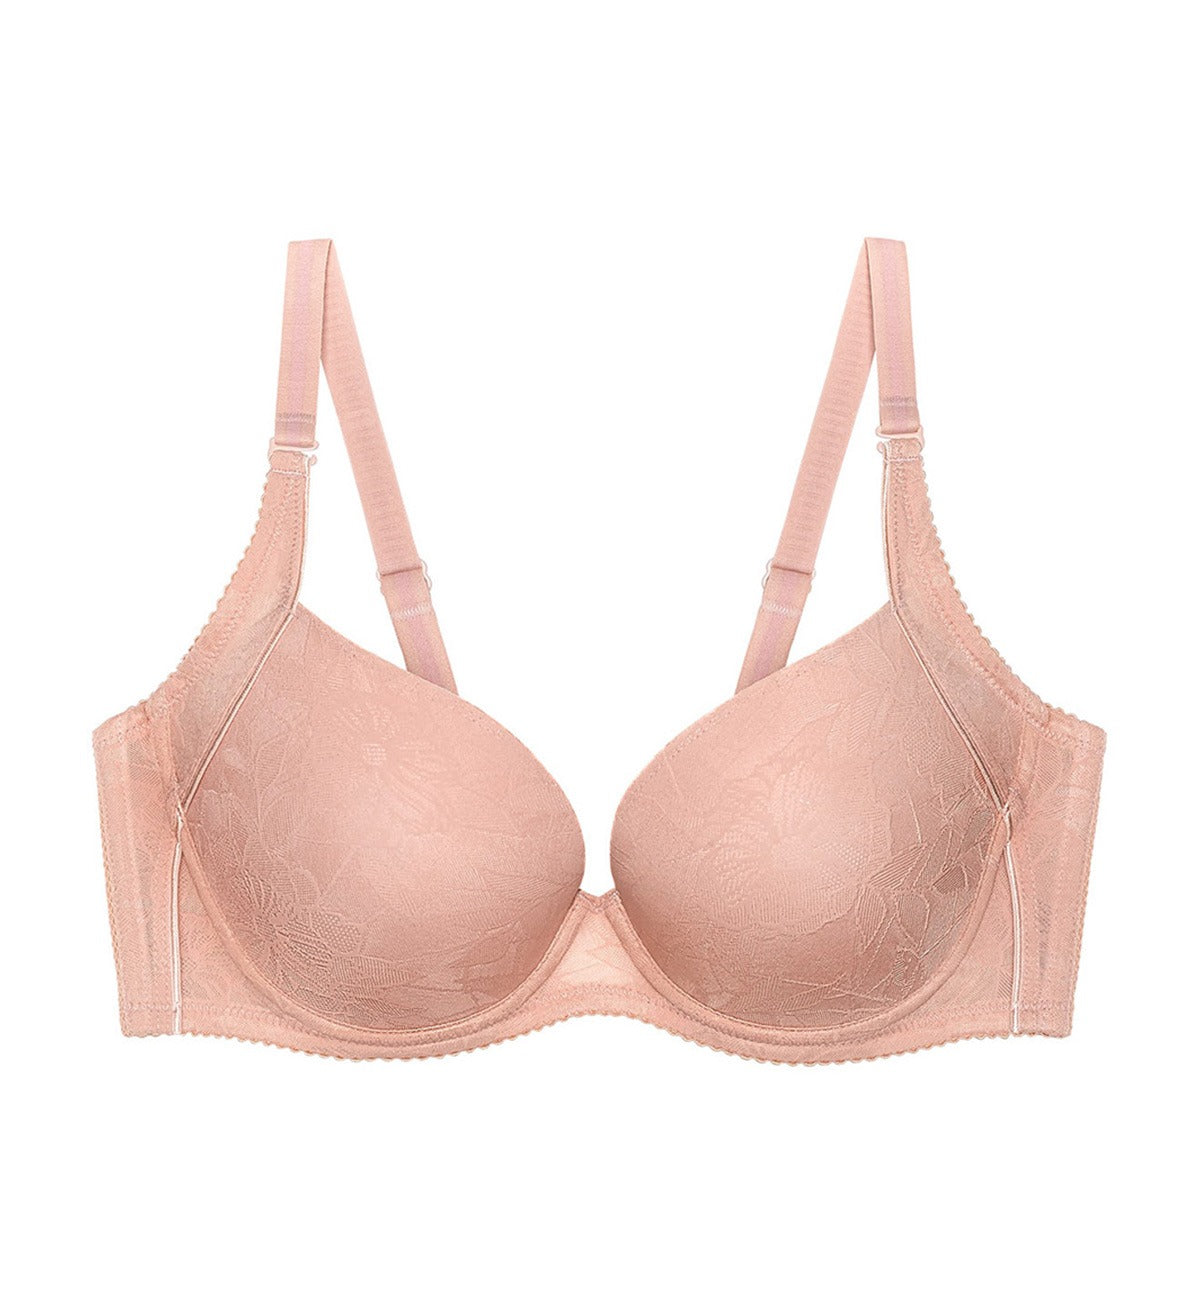 Wired Bras, Triumph, Pure Invisible Lace Wired Padded Bra